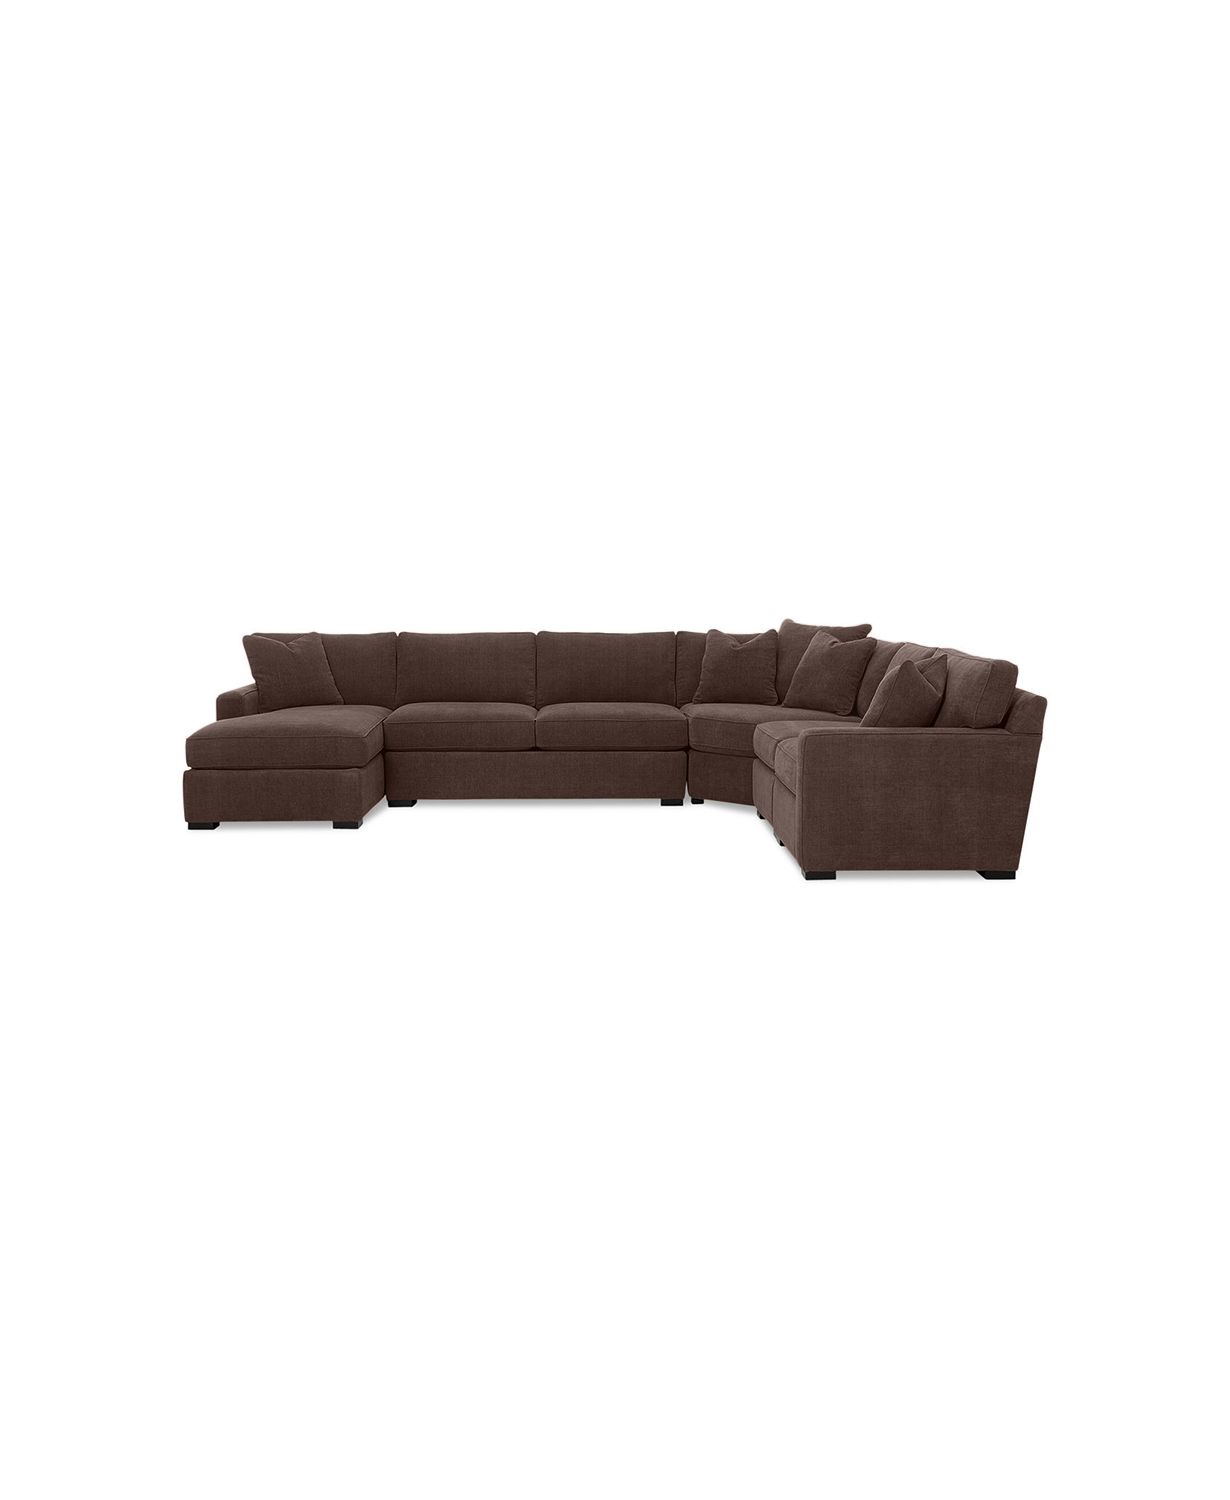 Radley 5-Piece Fabric Chaise Sectional Sofa, Created for Macy's $1599